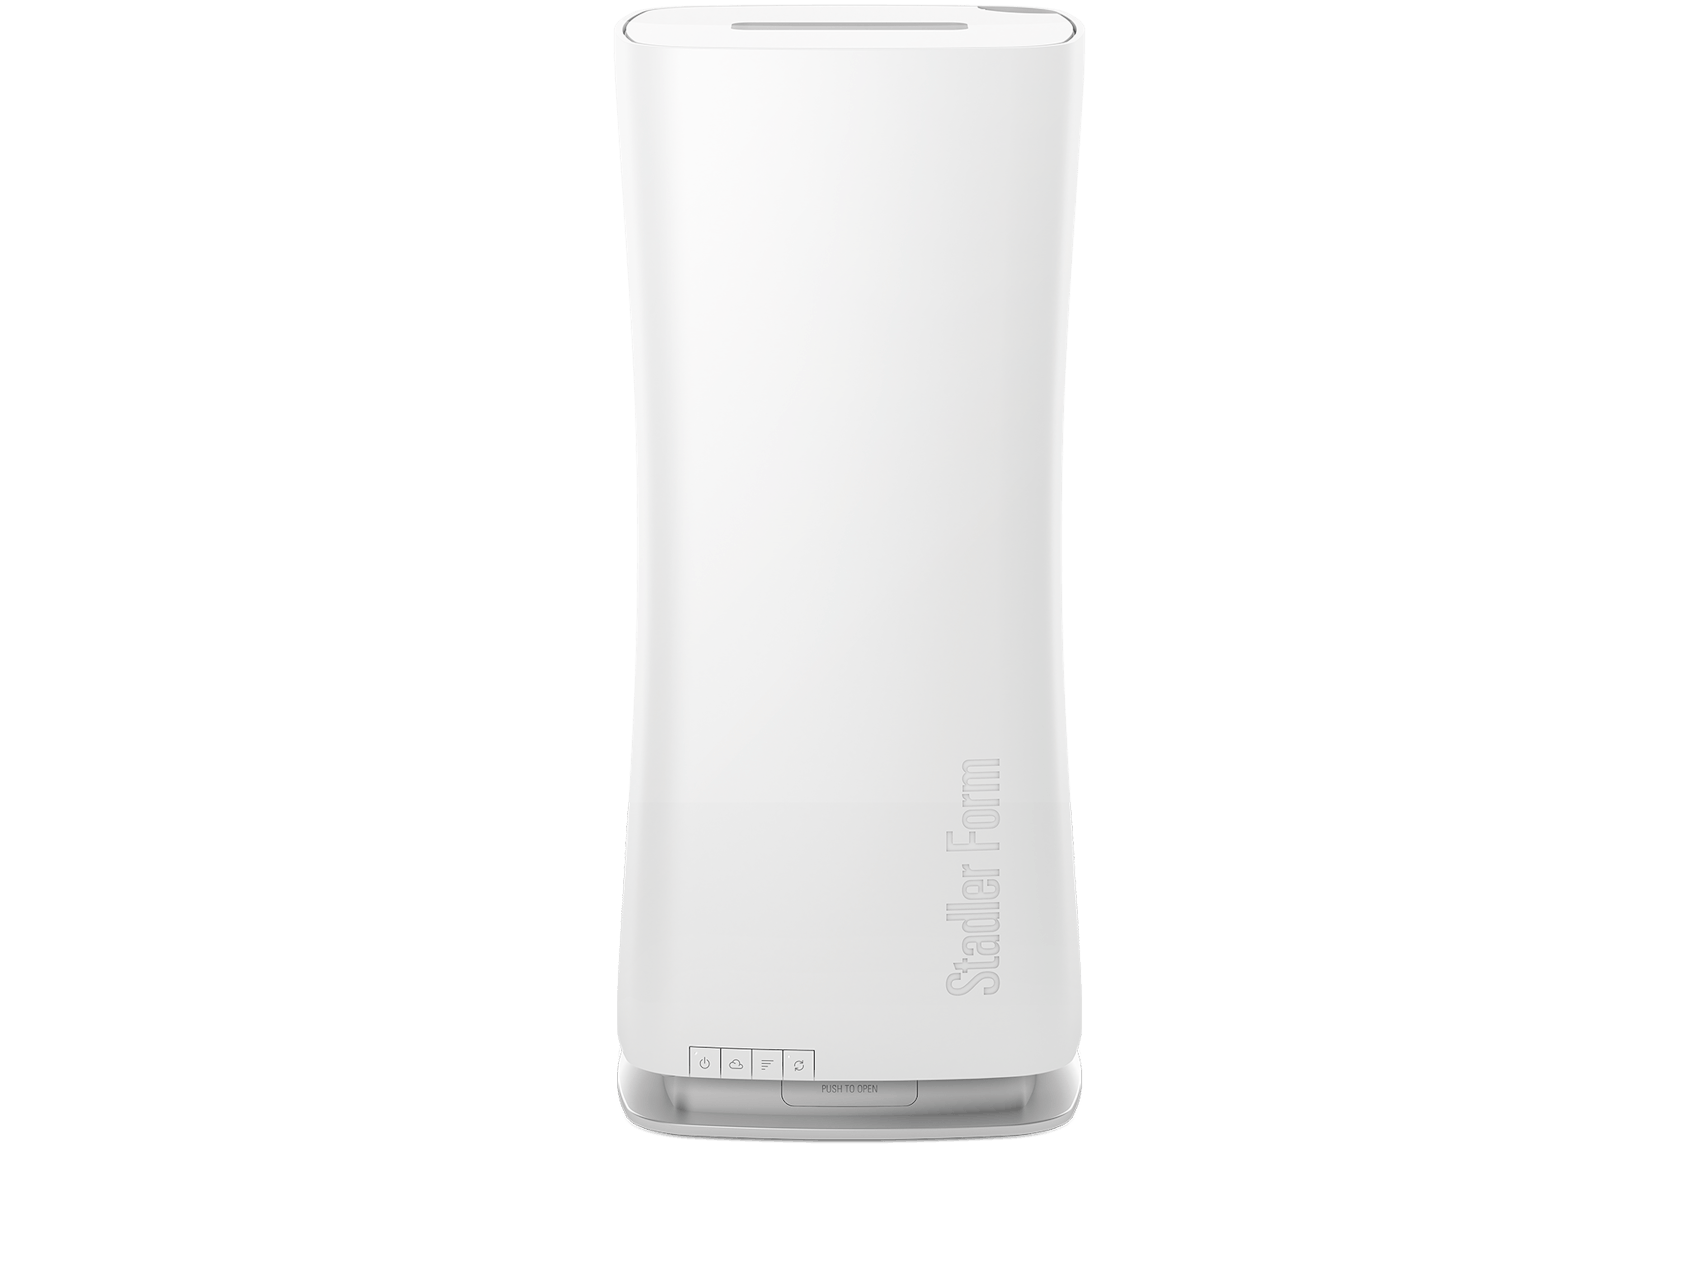 Eva little humidifier by Stadler Form in white as side view